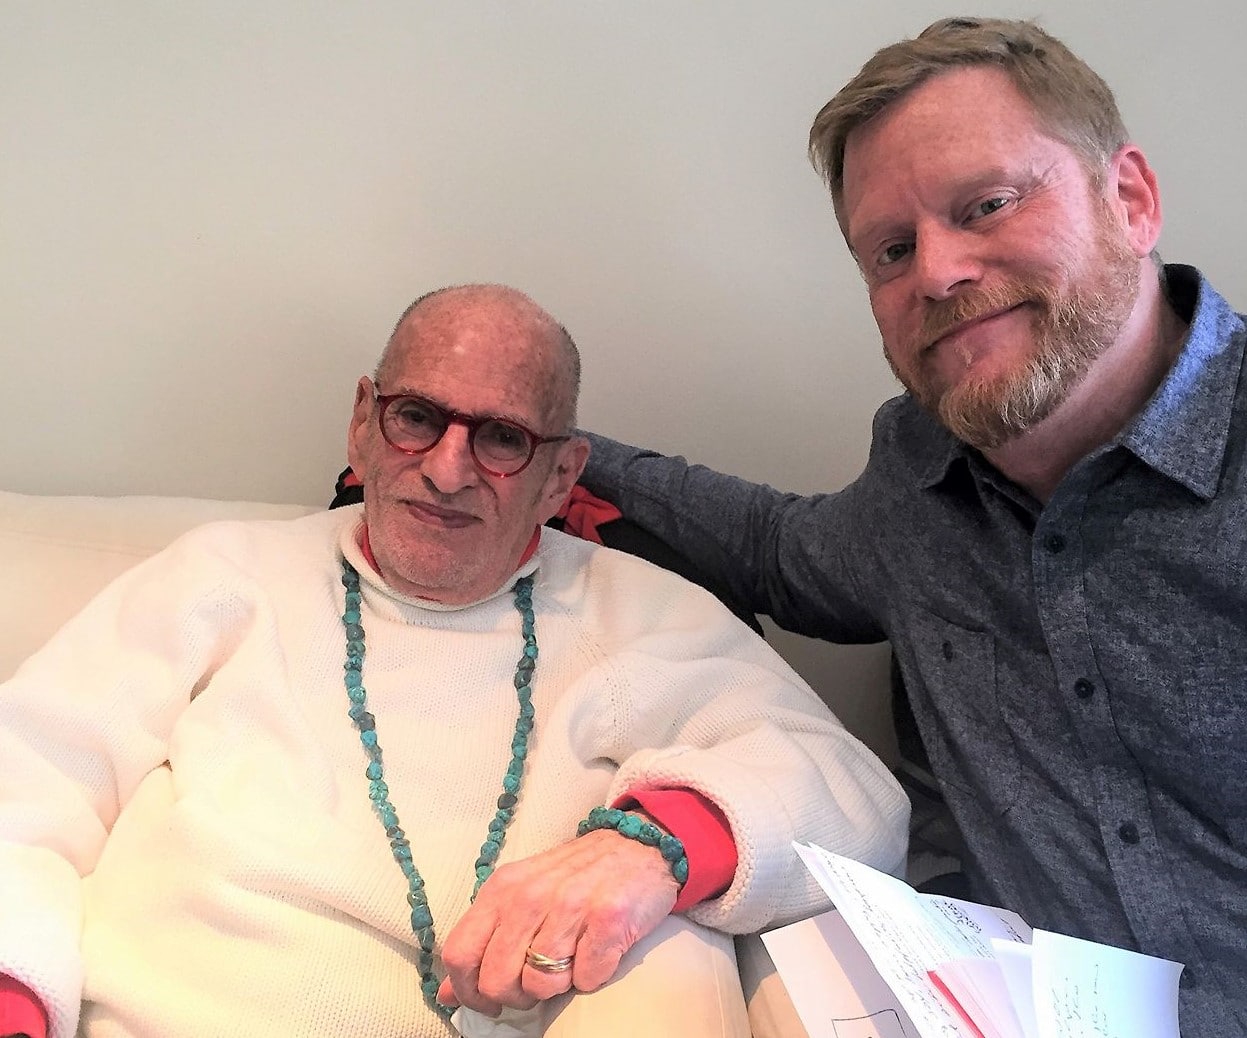 Shopping for Socks at the Mall with Larry Kramer